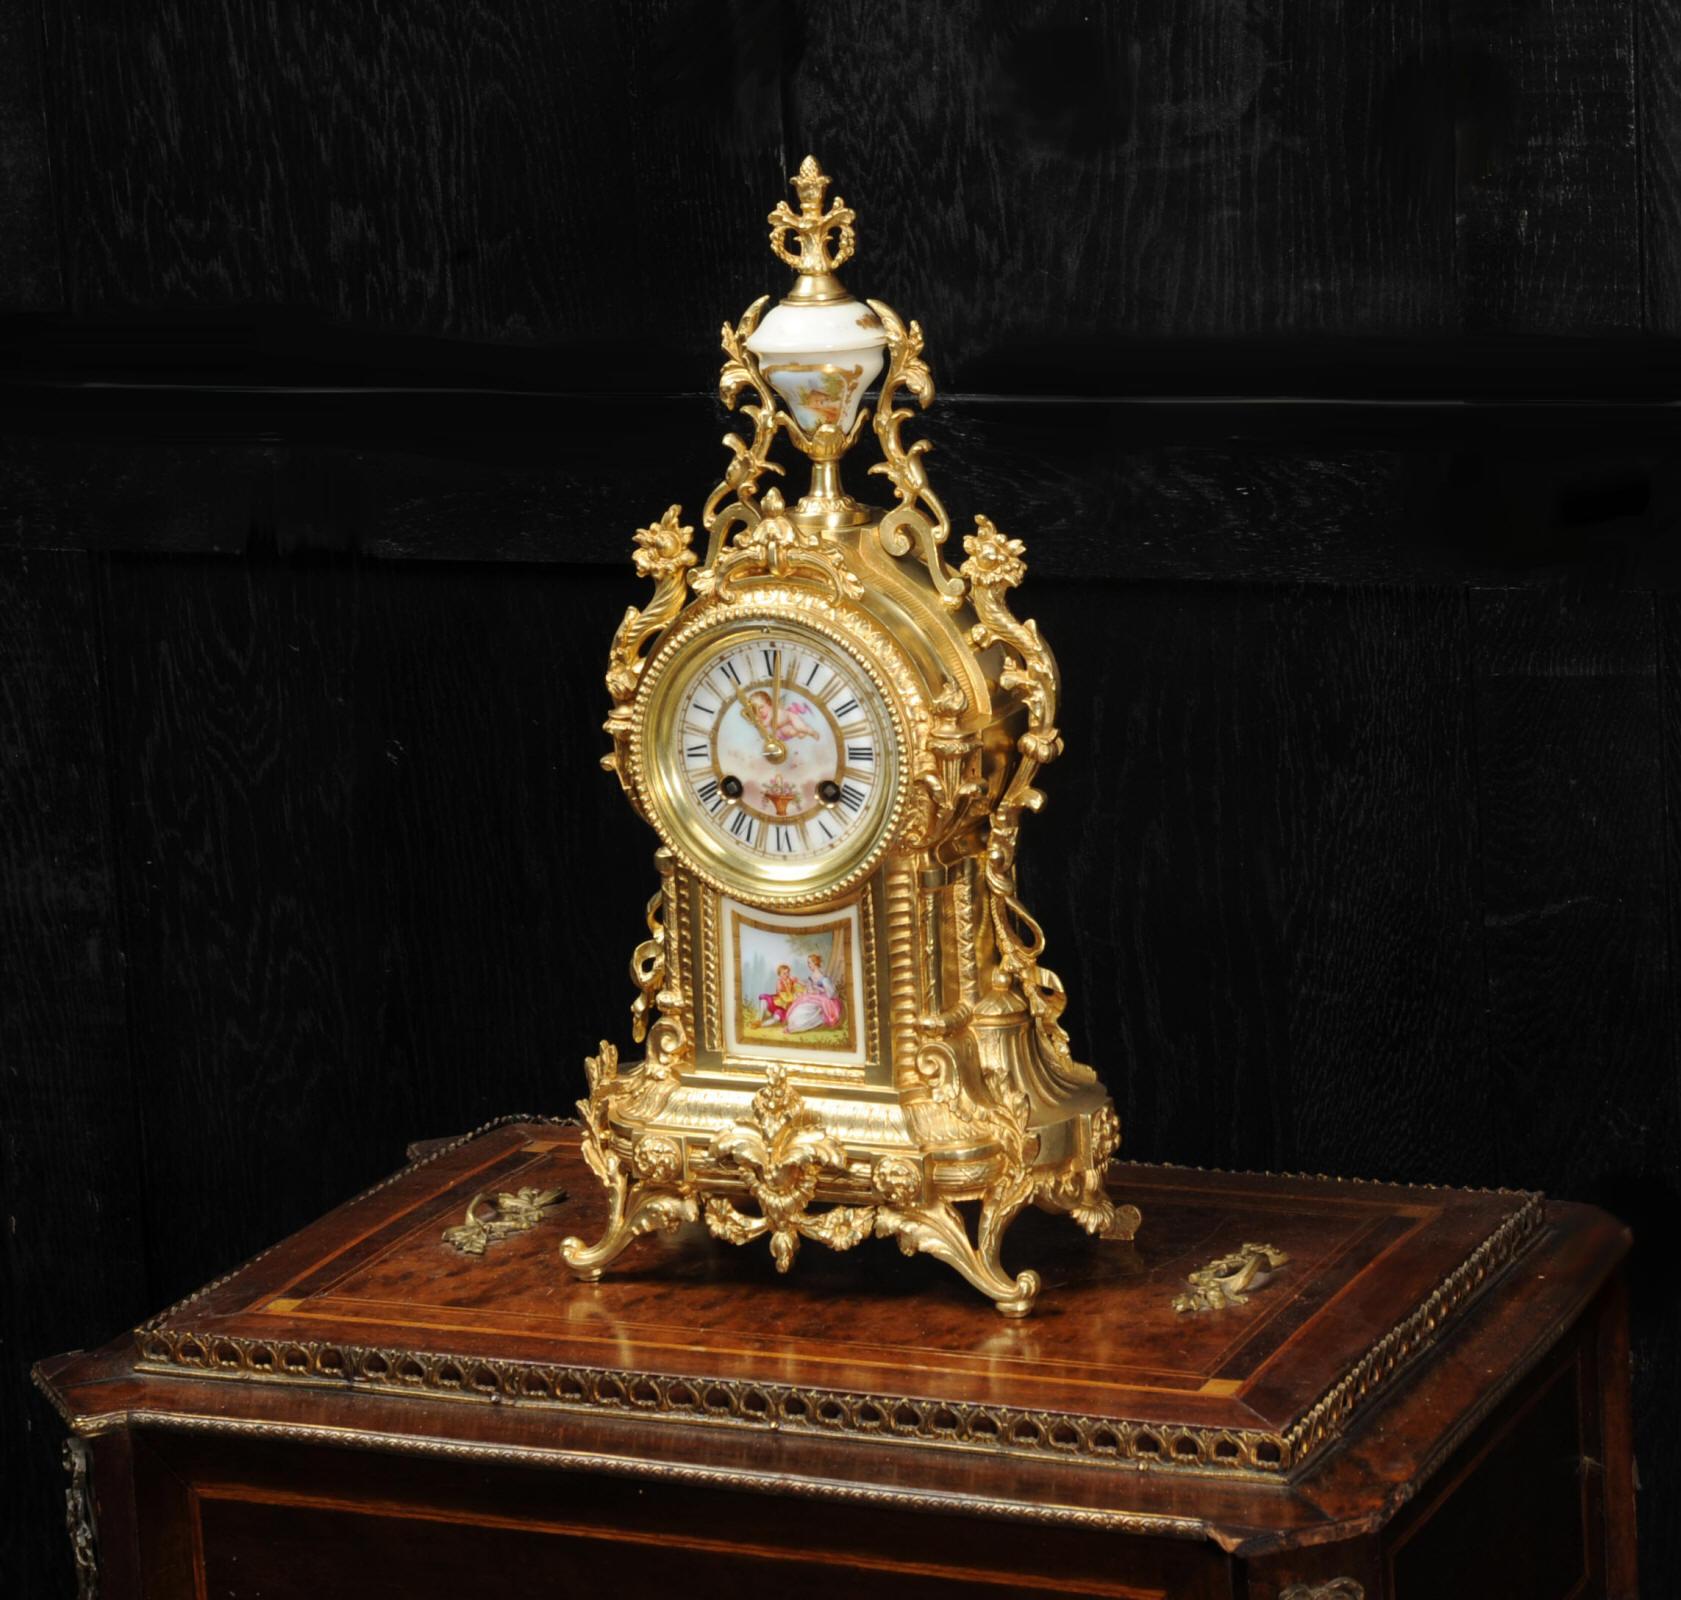 Louis XVI Antique French Ormolu and Sevres Porcelain Clock, Love